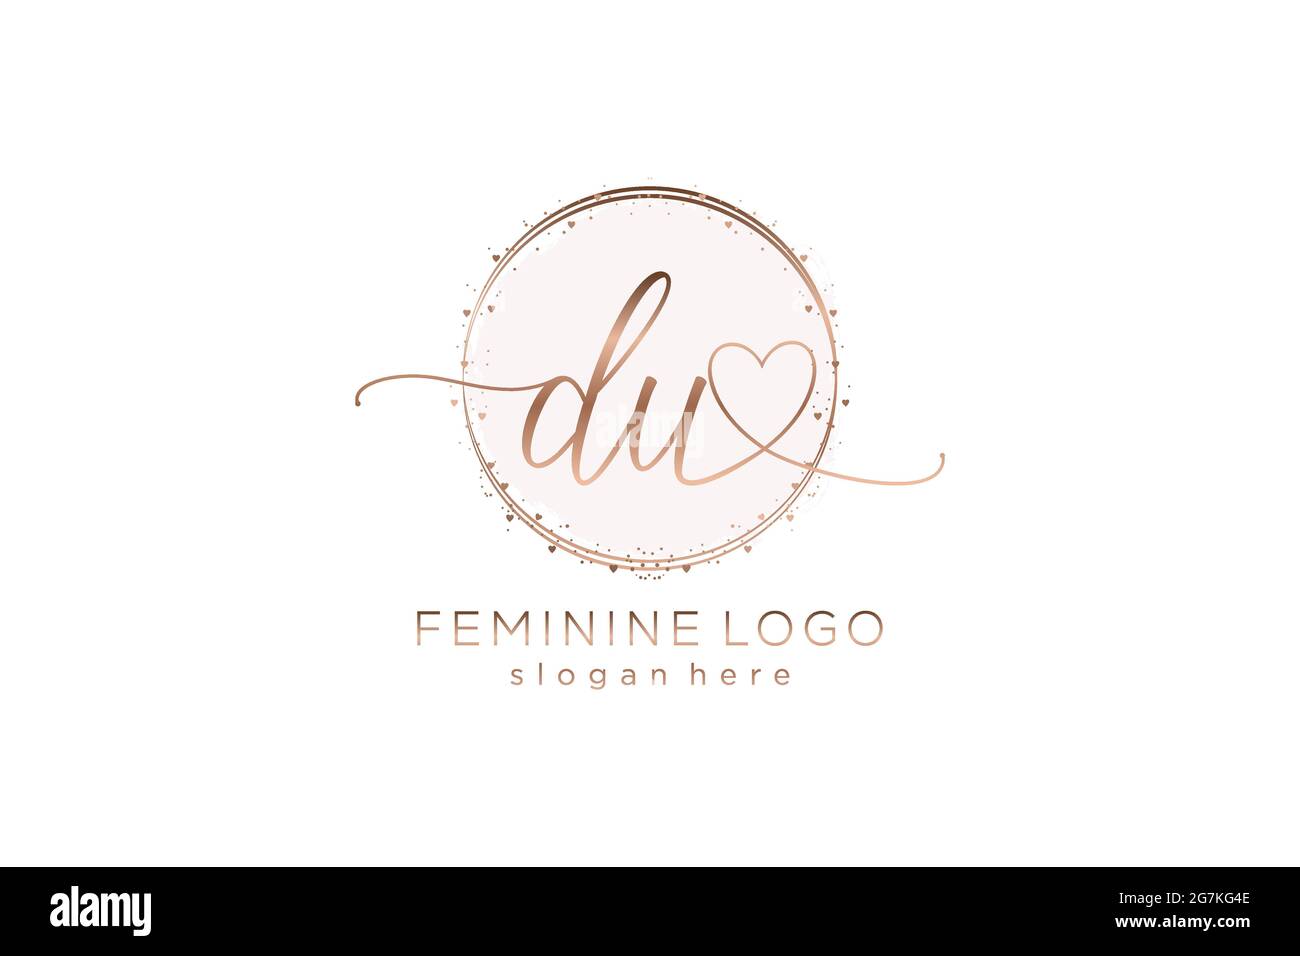 DU handwriting logo with circle template vector logo of initial wedding, fashion, floral and botanical with creative template. Stock Vector